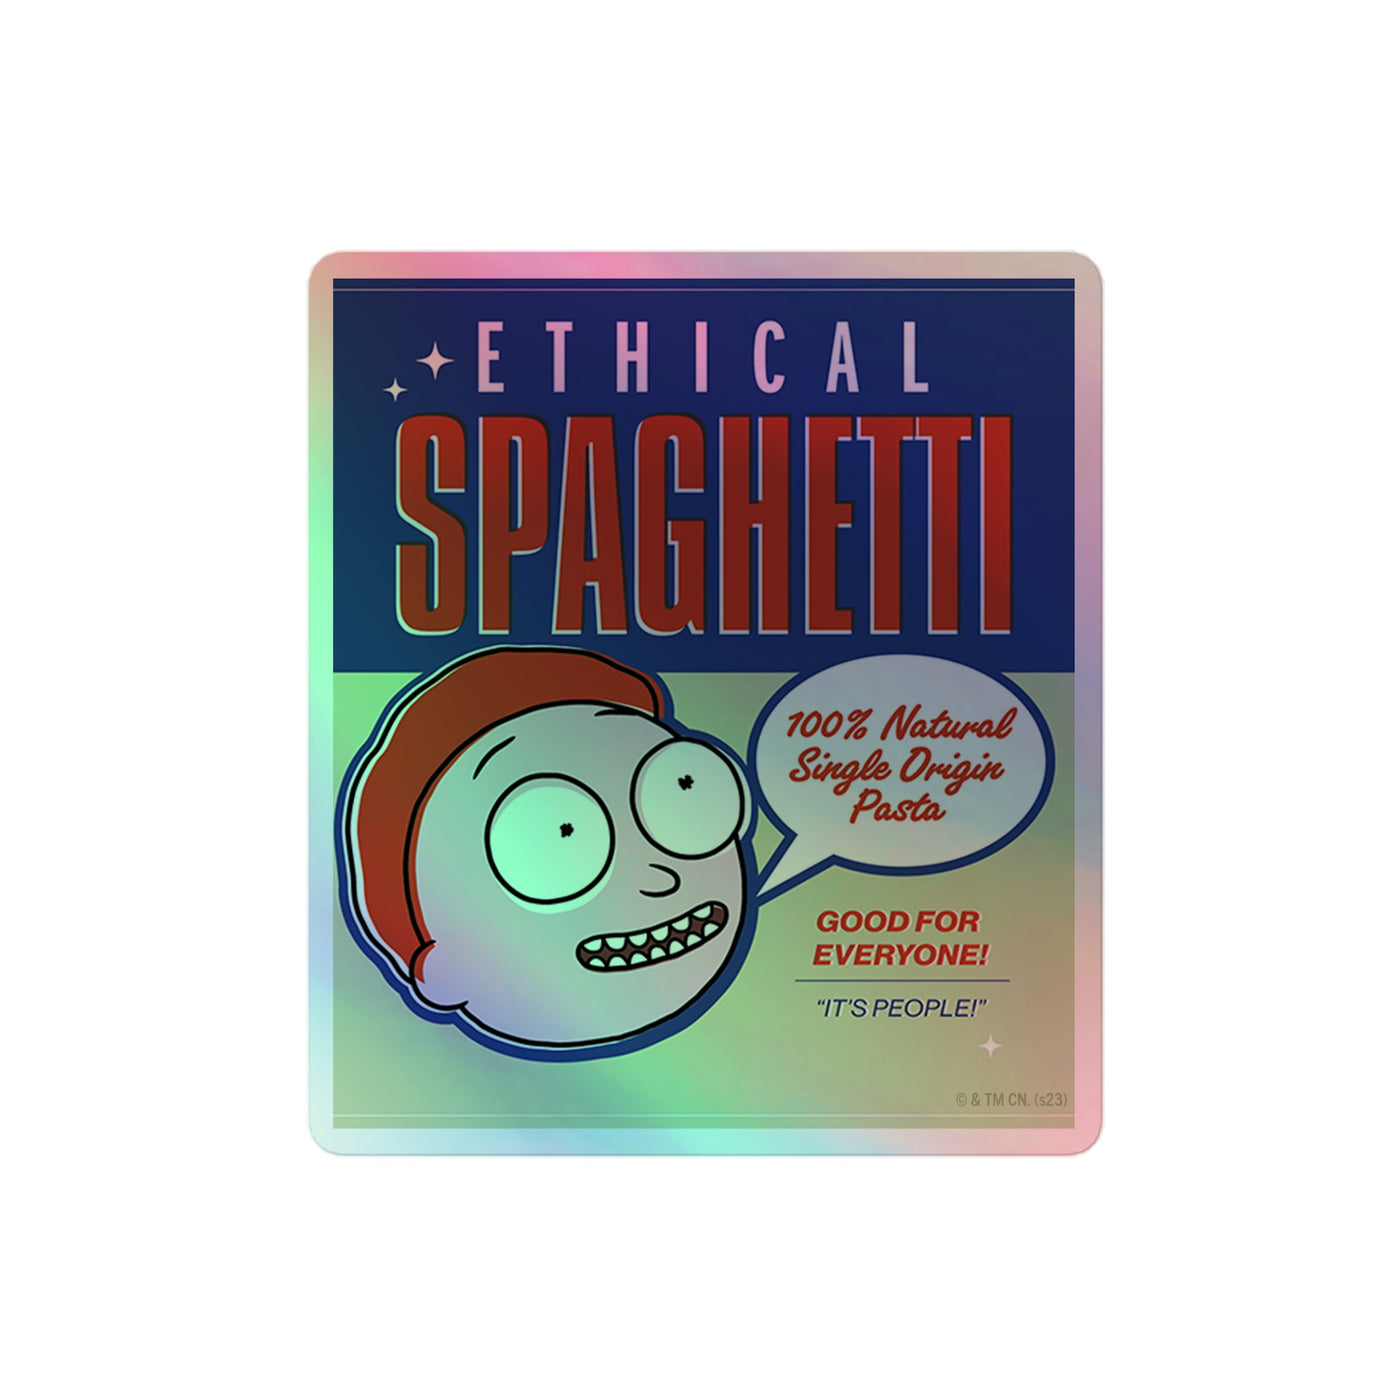 Rick and Morty Ethical Spaghetti Kiss-Cut Holographic Sticker